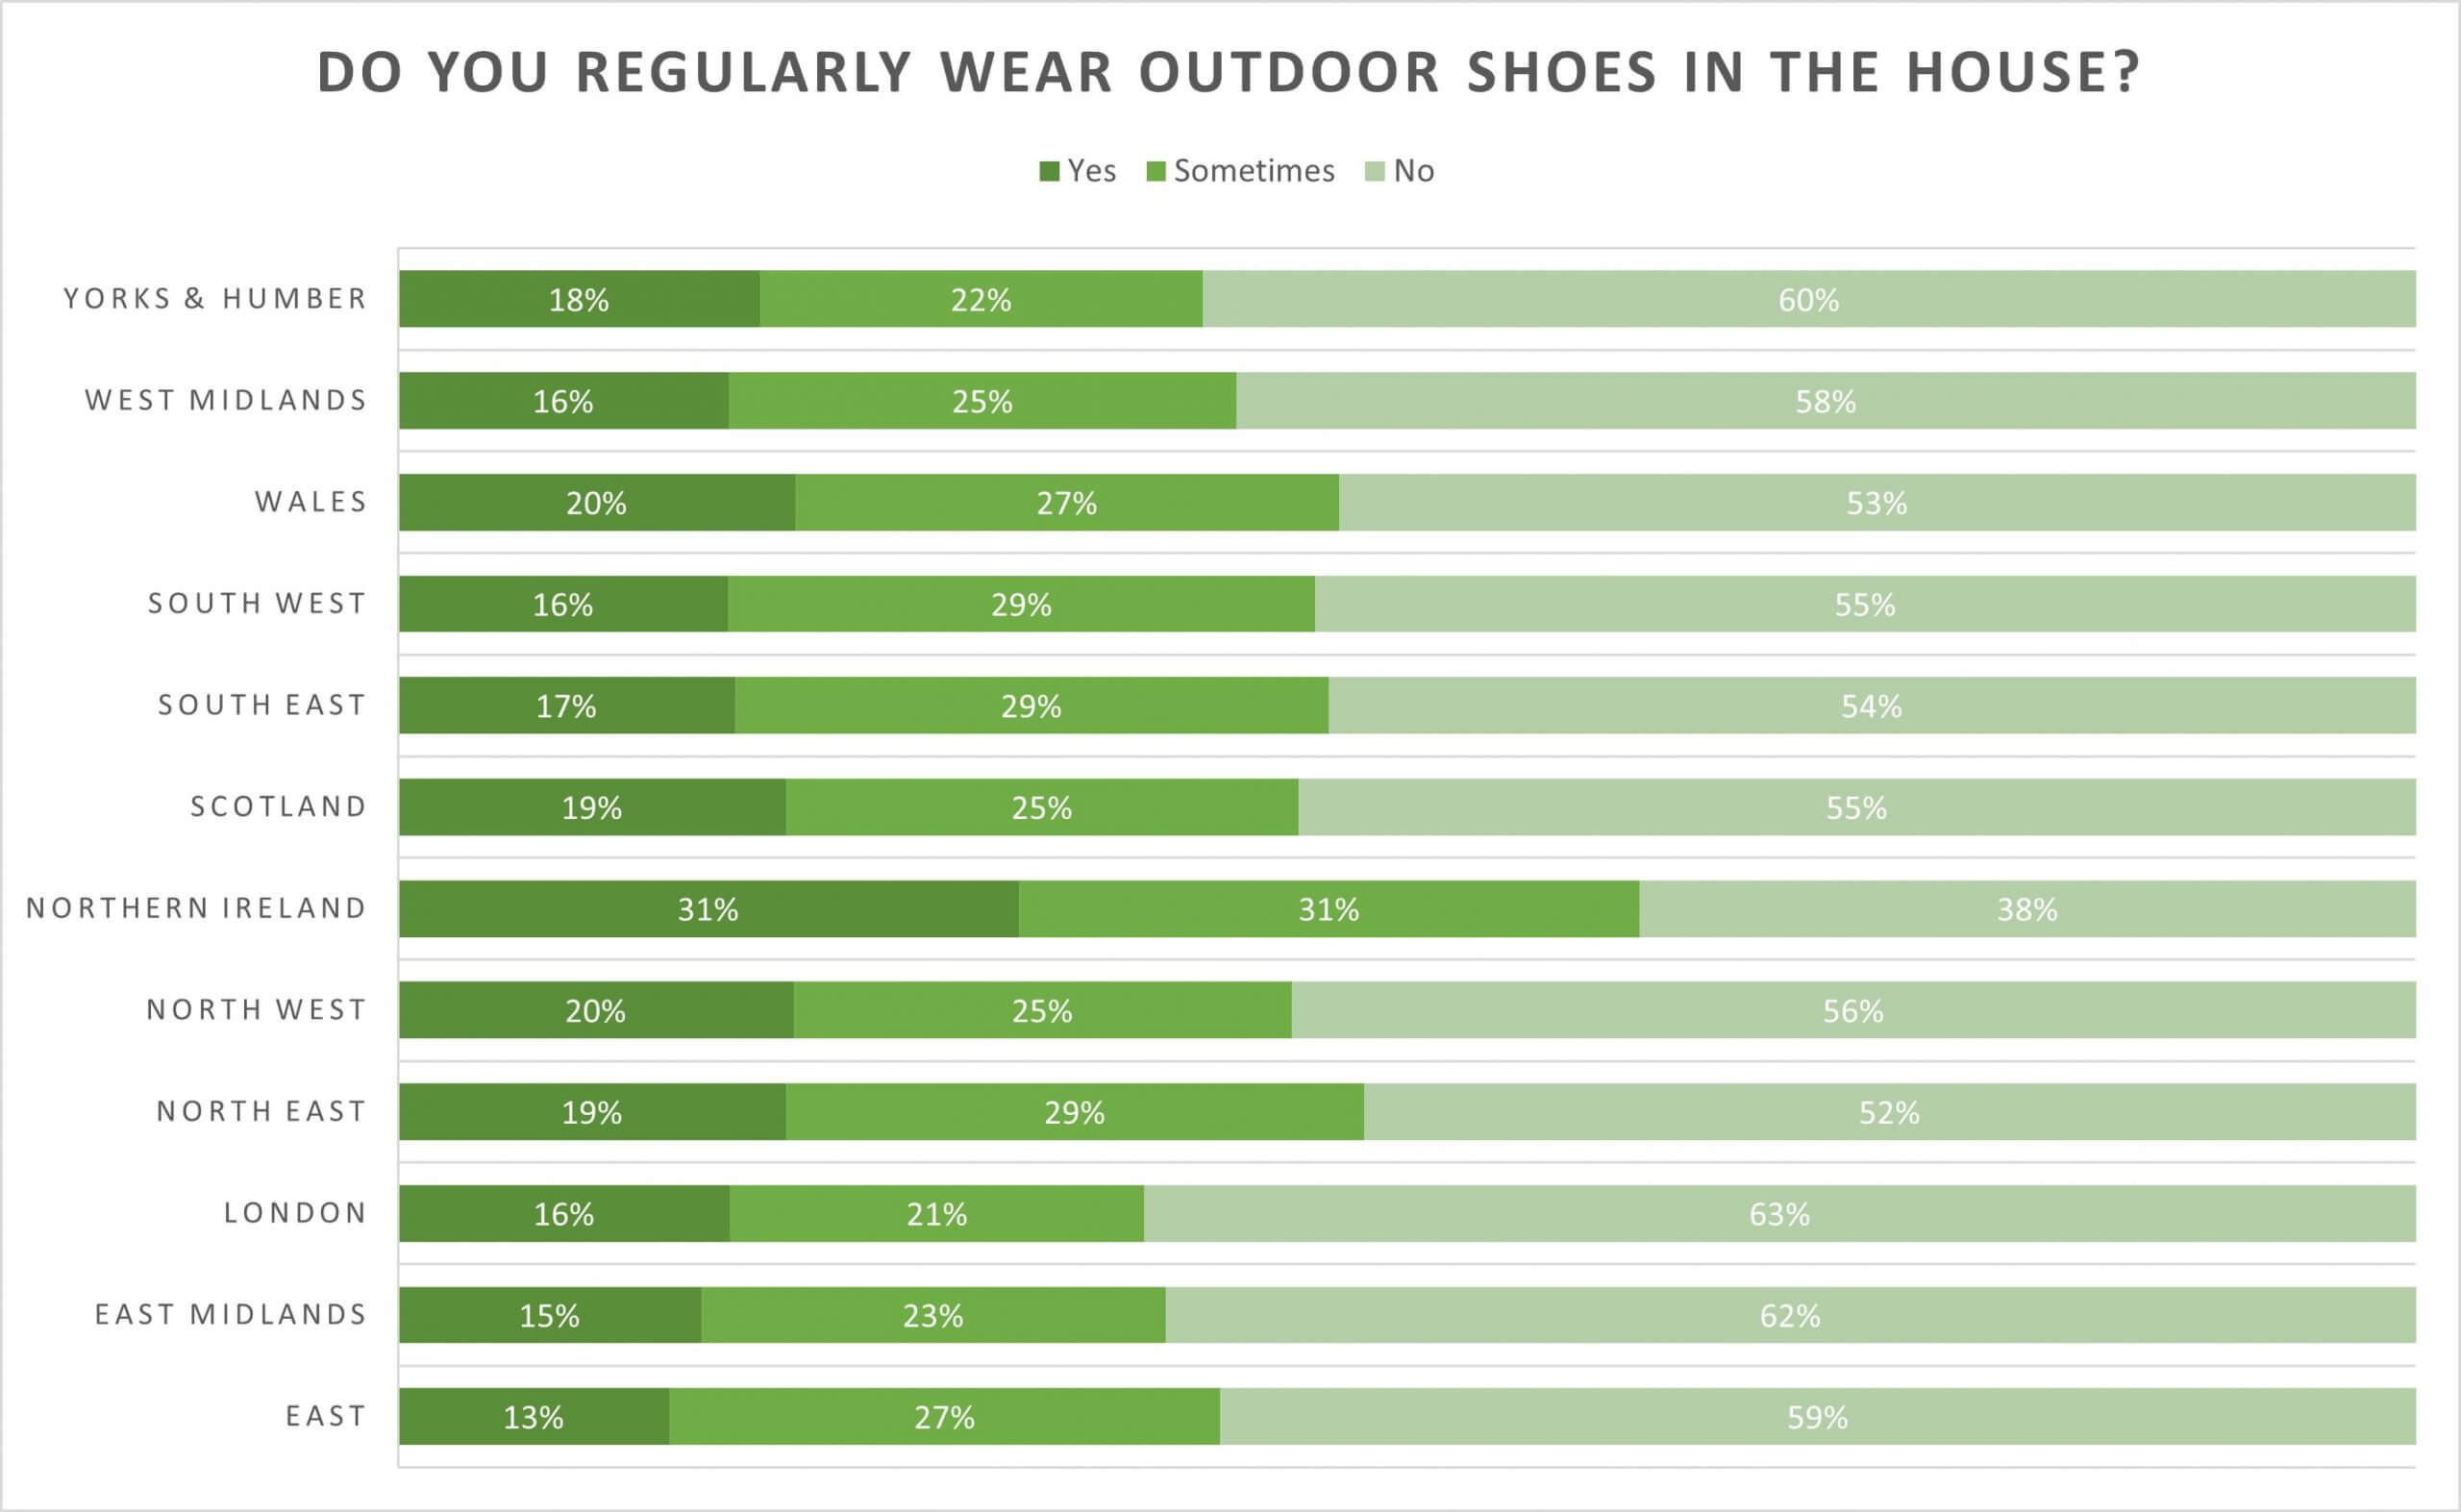 Graph shows regional habits of wearing outdoor shoes in the house